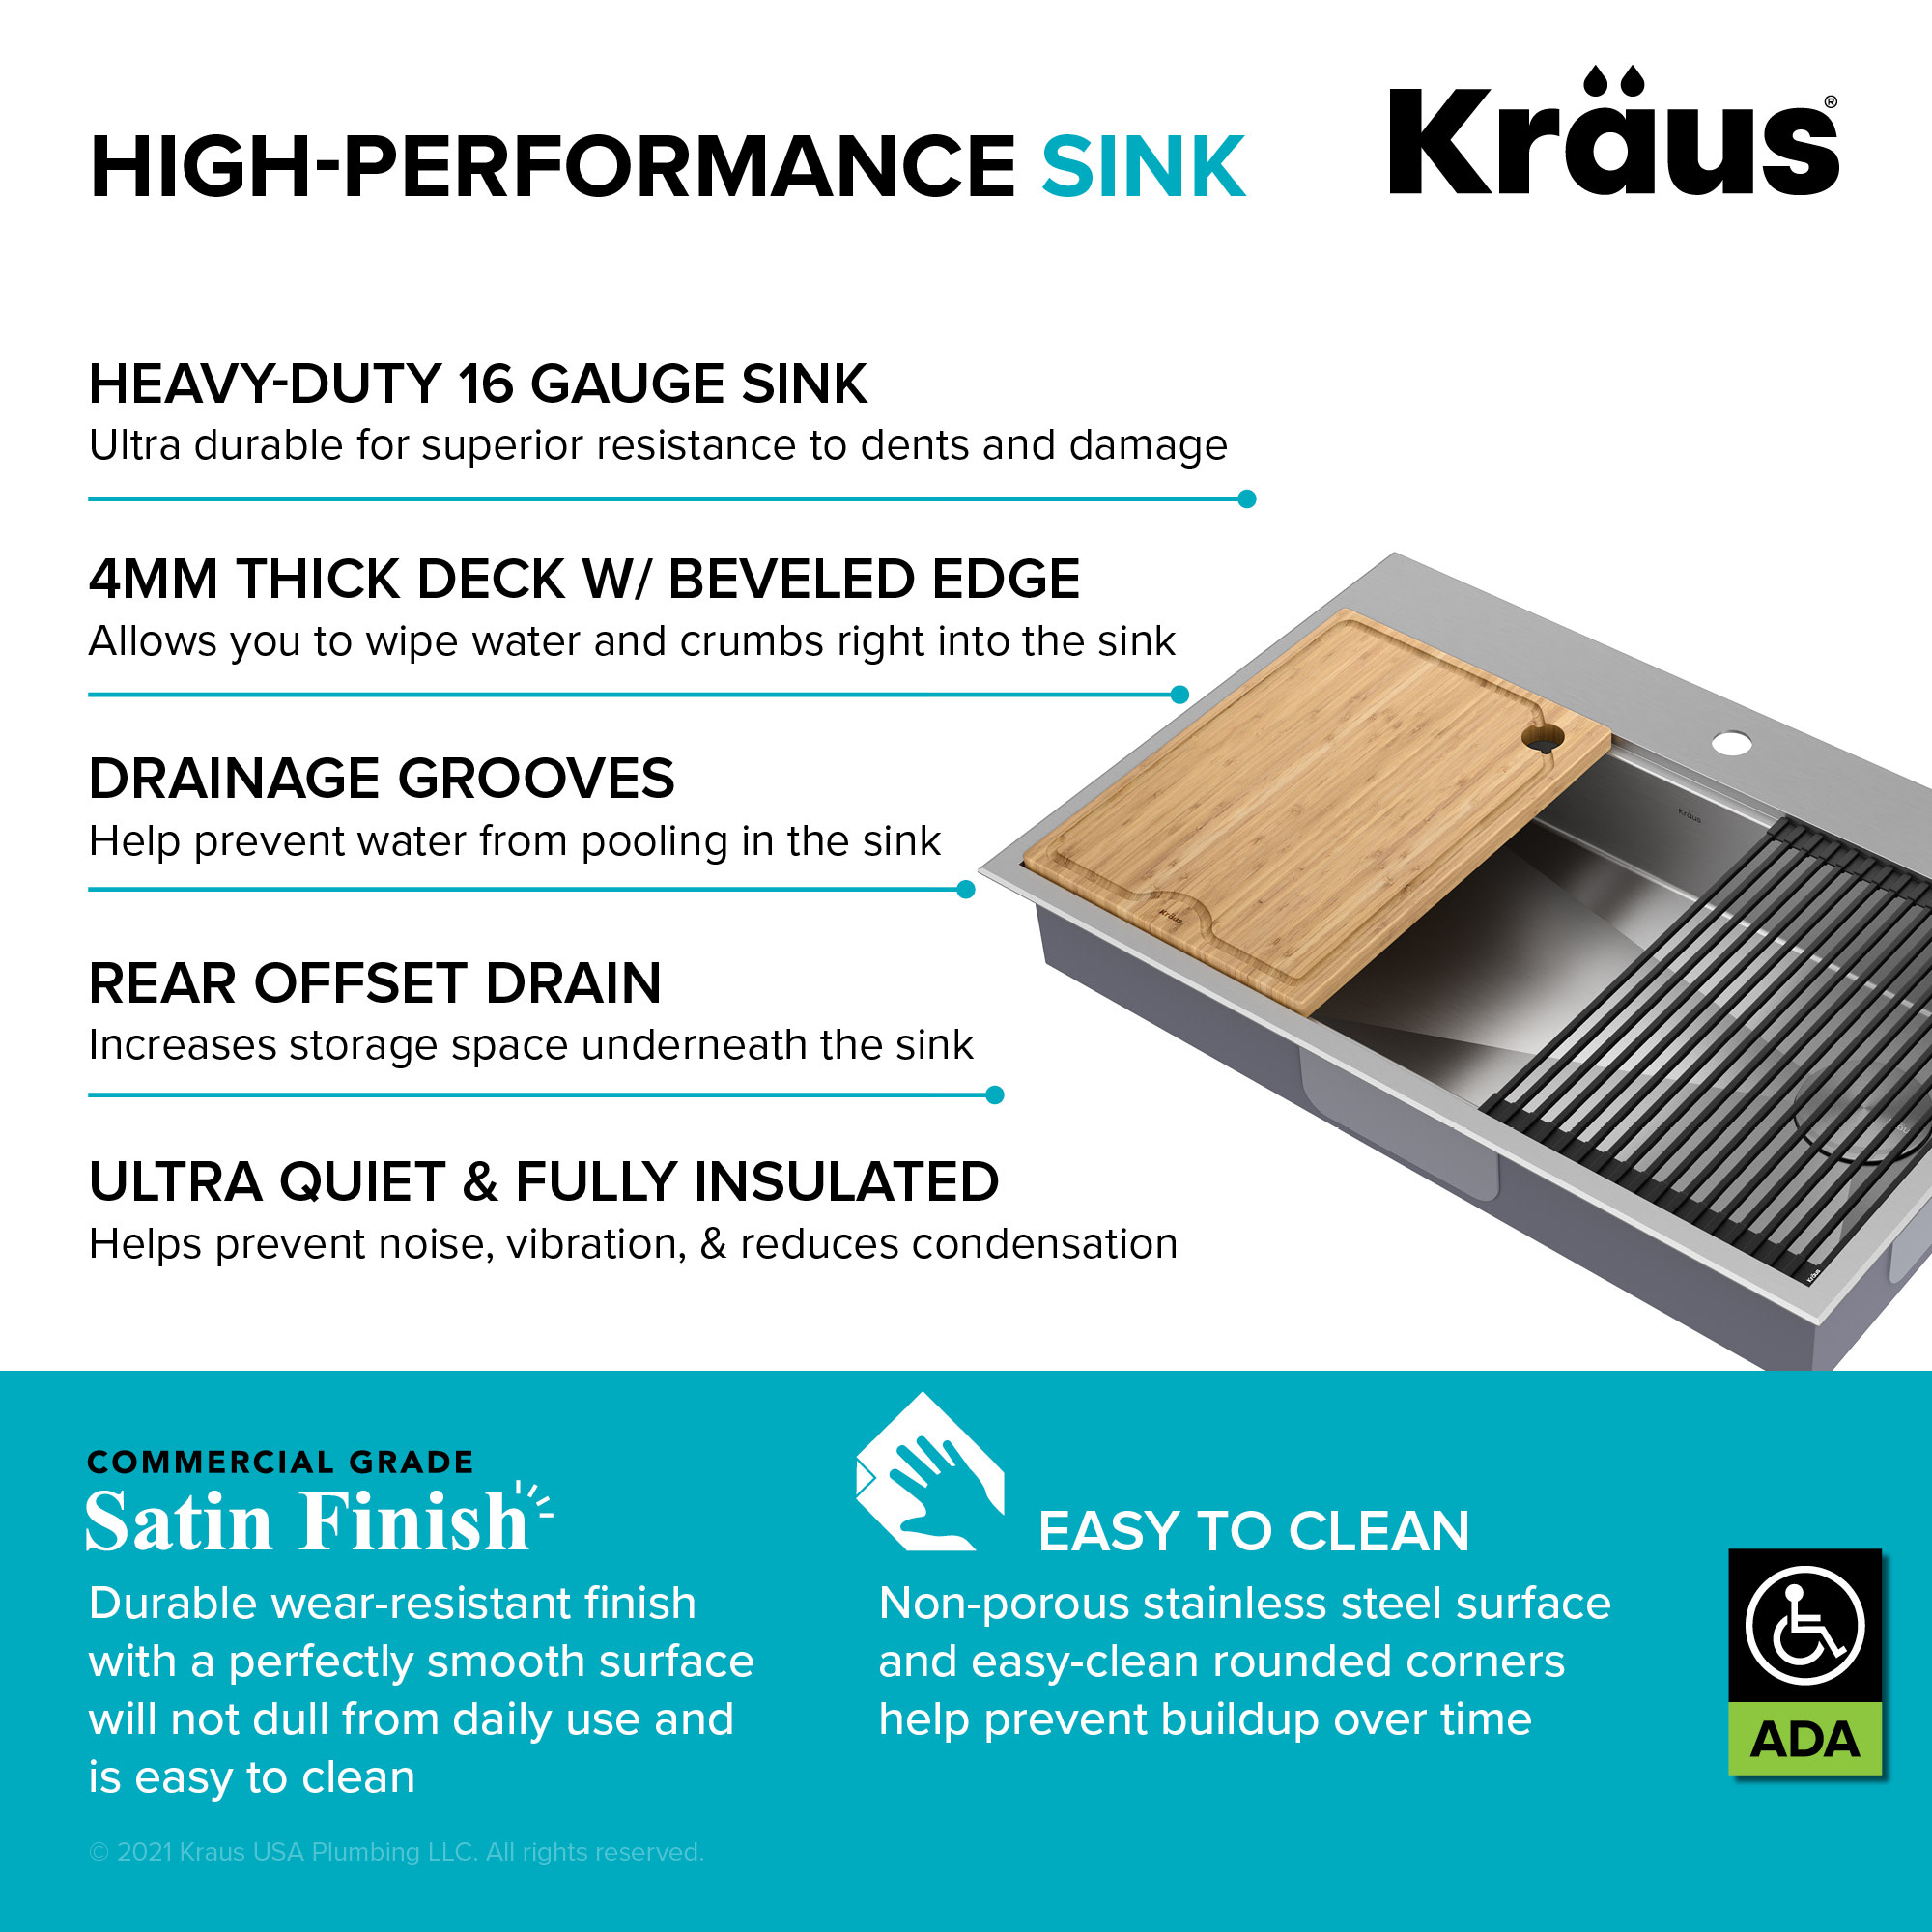 Kraus Kore Workstation 33 inch Topmount Drop-In 16 Gauge Stainless Steel Single Bowl Kitchen Sink in PVD Gunmetal Finish with Accessories - image 2 of 7